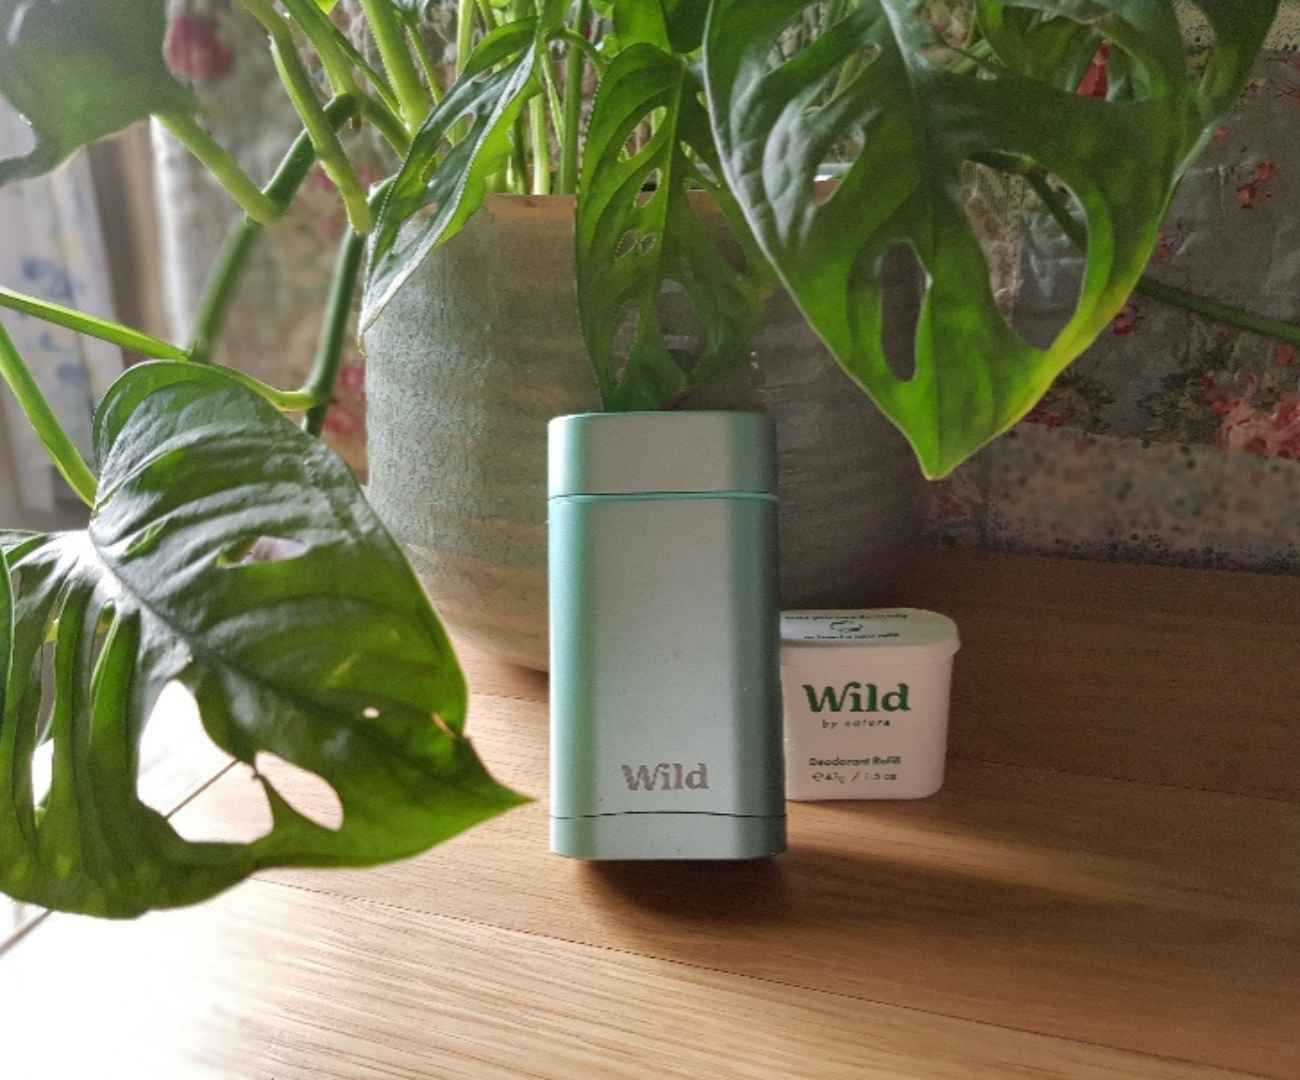 Tame that sweat with this Wild Deodorant Review!